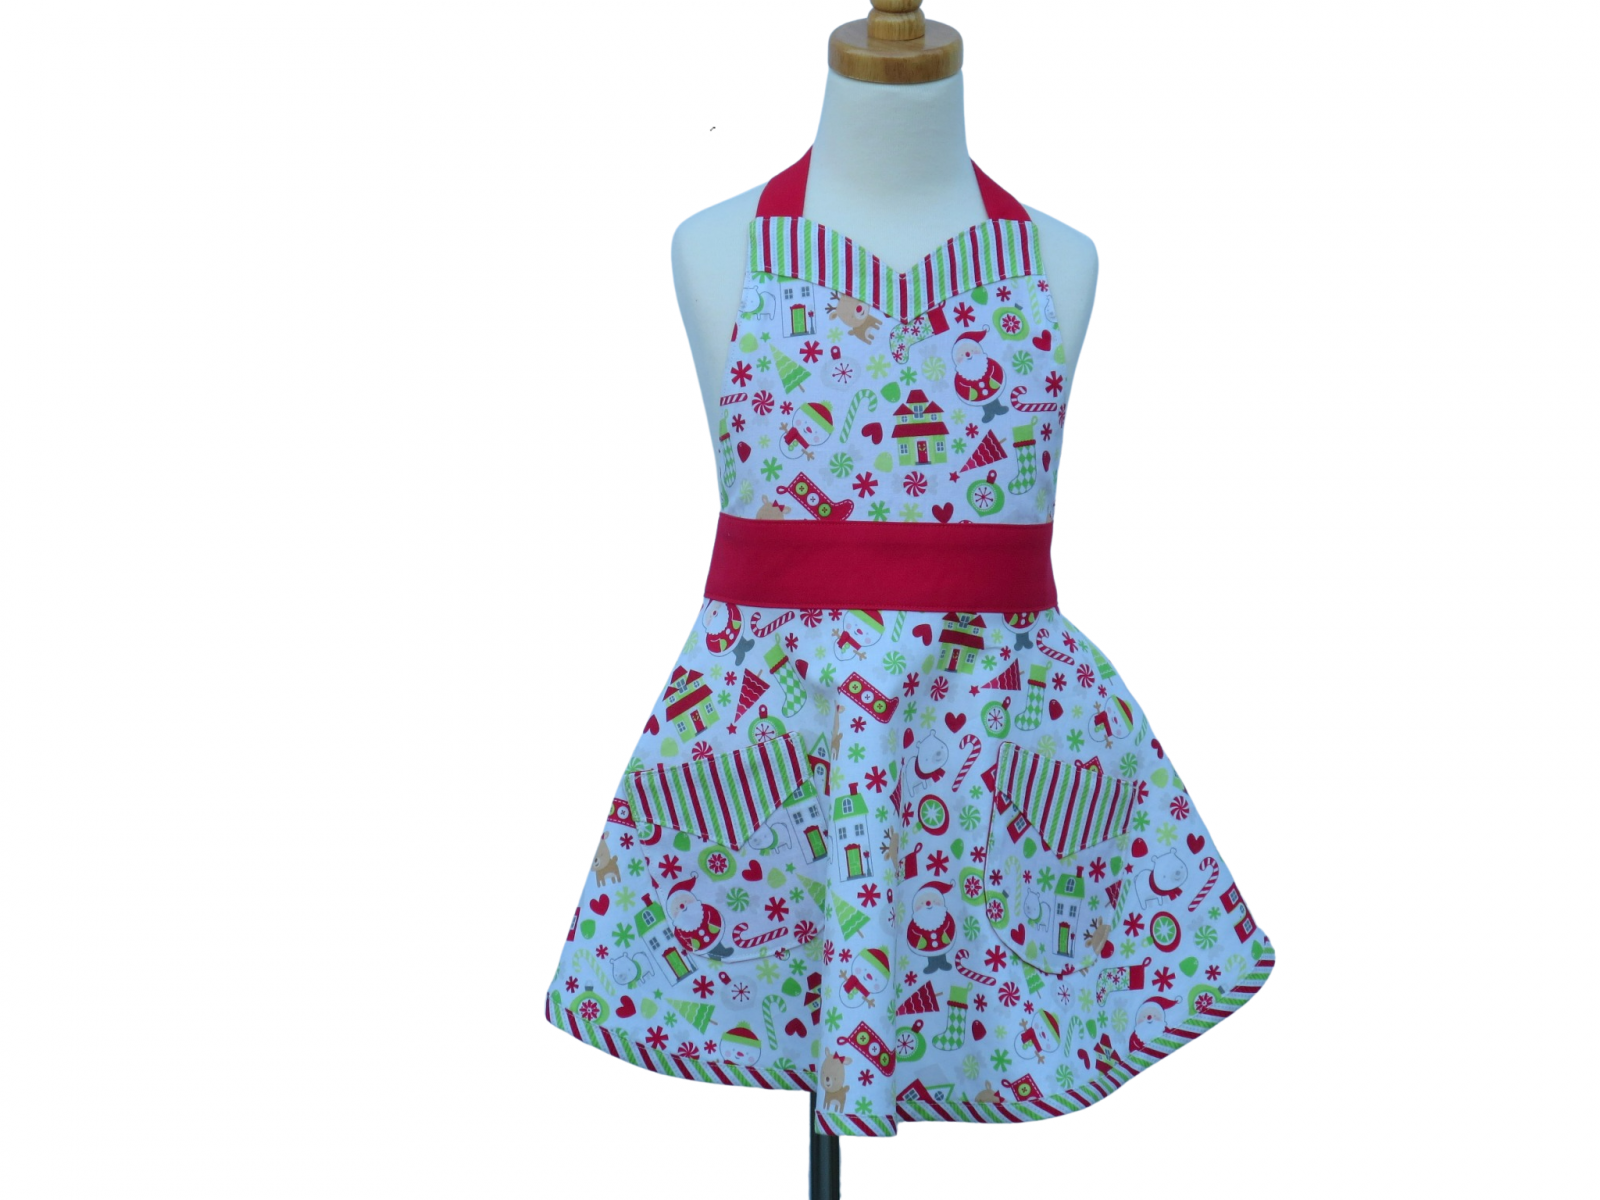 Women's and girl's matching retro style Christmas aprons